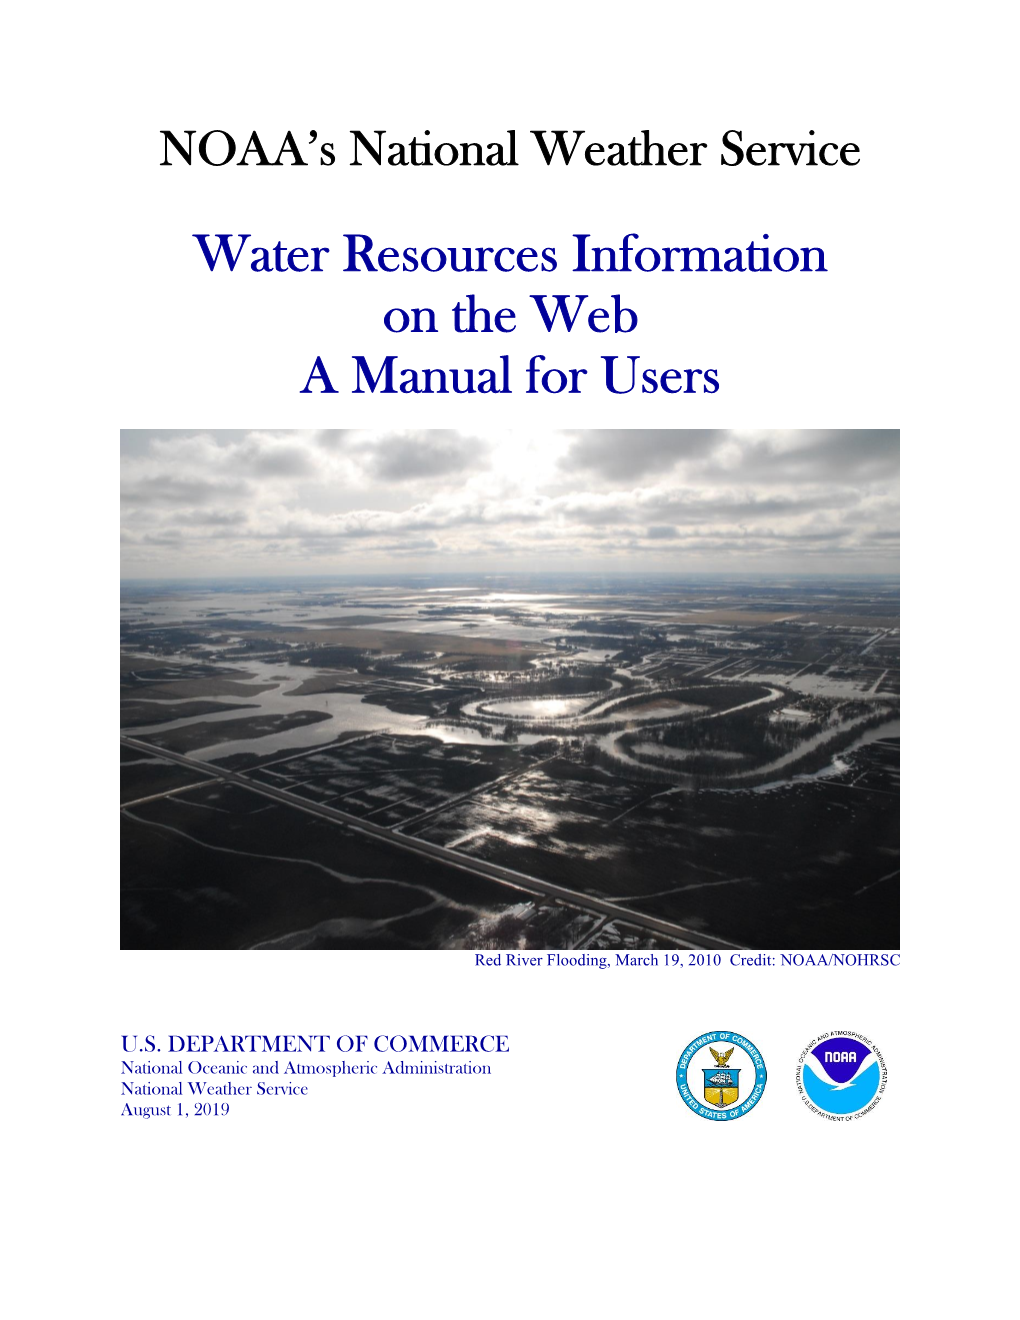 Water Resources Information on the Web: a Manual for Users